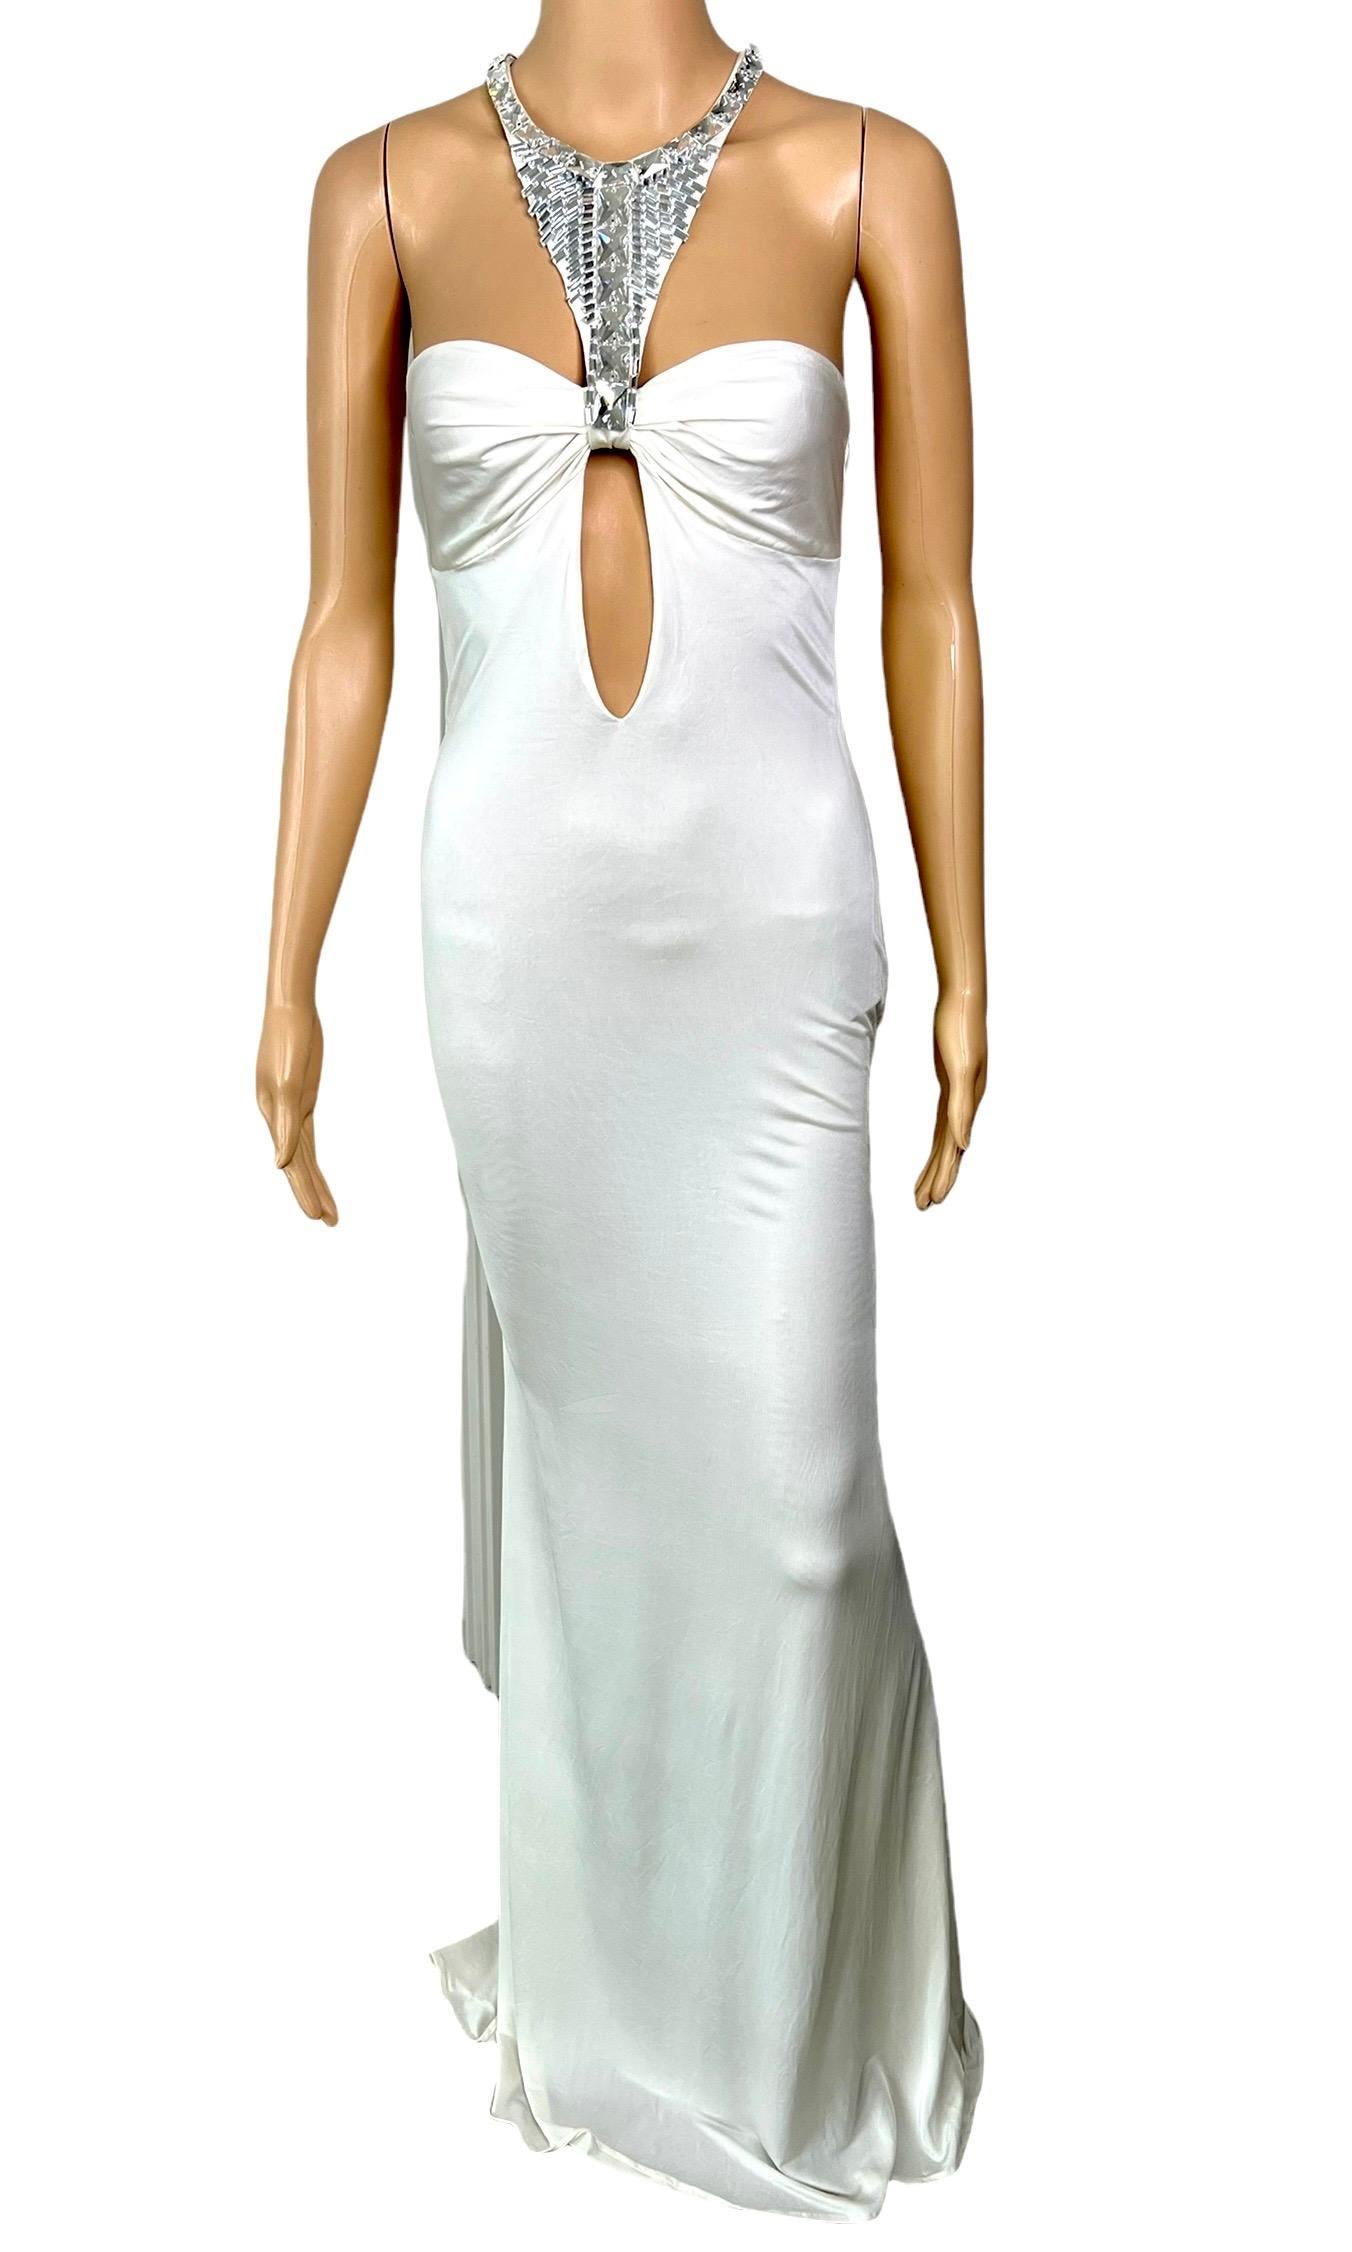 Tom Ford for Gucci F/W 2004 Embellished Plunging Cutout Ivory Evening Dress Gown For Sale 7